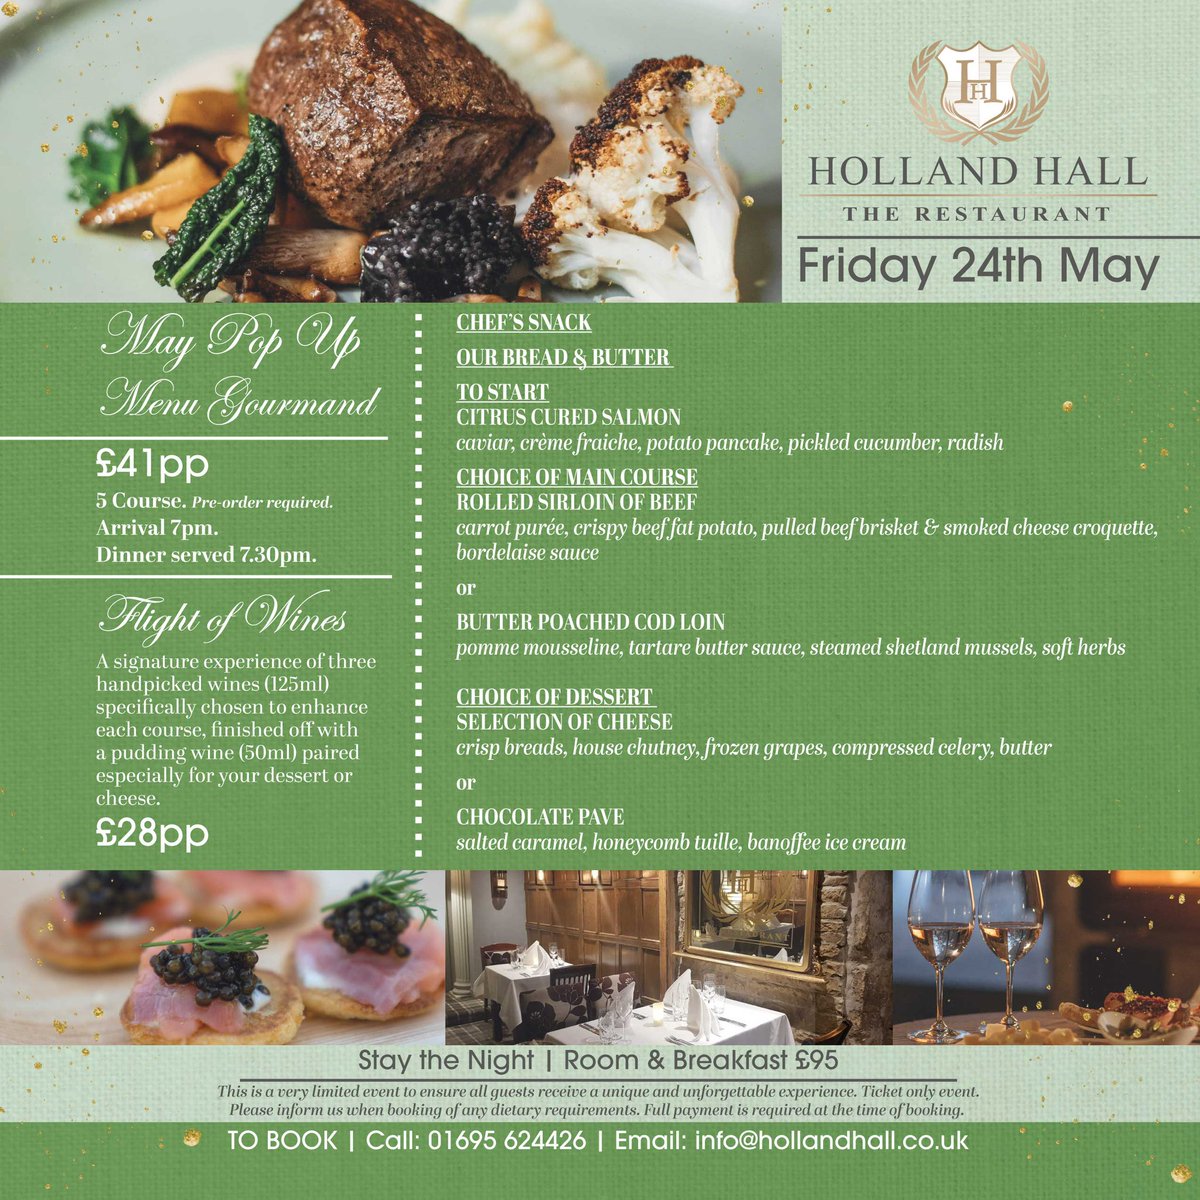 GOURMET DINING EXPERIENCE WITH WINE PAIRINGS - Ready for a taste bud adventure? Join us on Friday 24th May for a 5-course meal at our 'May Pop Up – Menu Gourmand' event. 🍷 💚✨

#finedining #therestaurant #finefood
#TheRestaurantatHollandHall #FineDiningExperience #maypopup